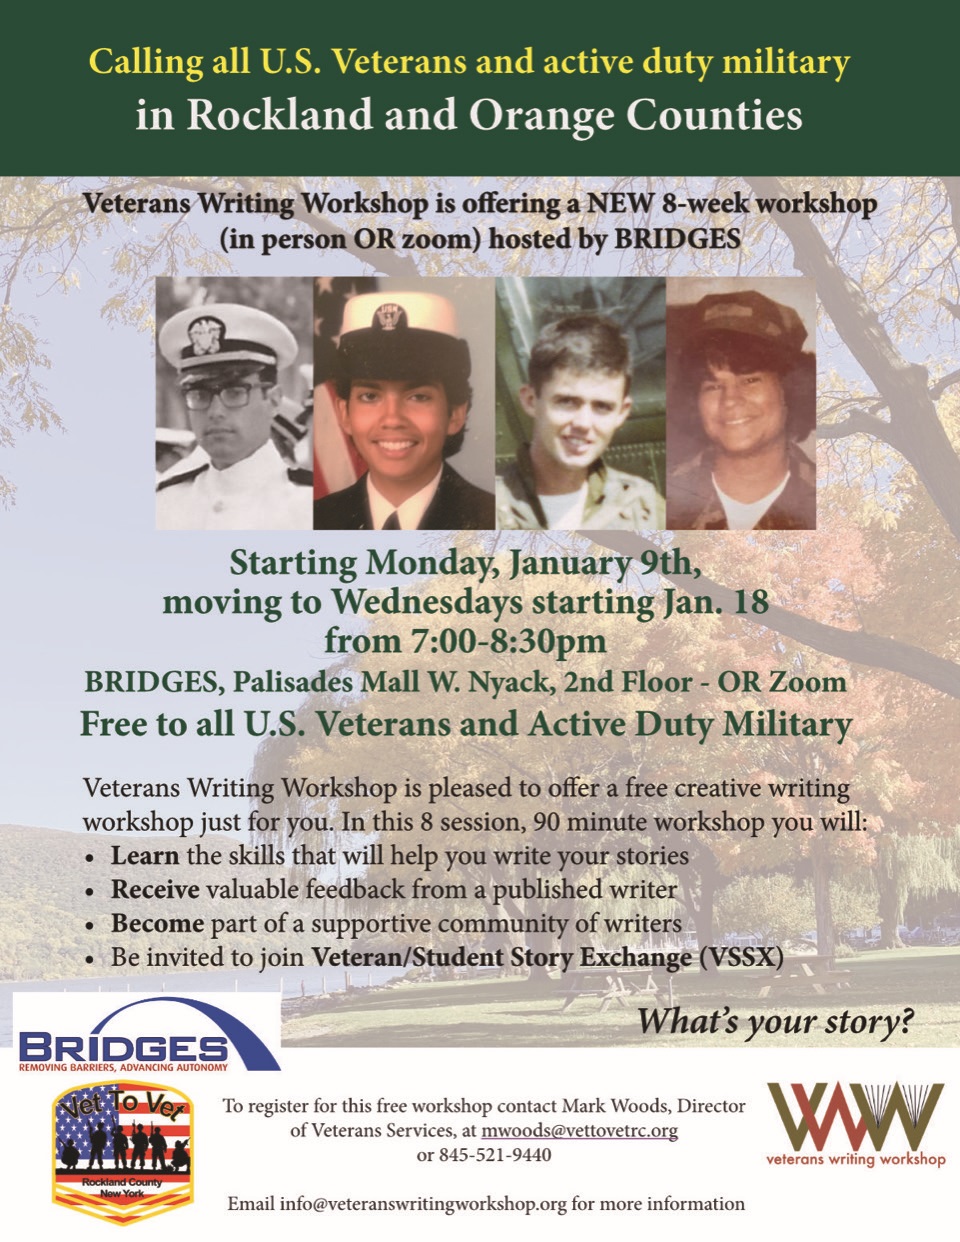 Veterans Writing Workshop is pleased to offer a free 8-week creative writing workshop just for U.S. Veterans and active-duty military in Rockland and Orange Counties. In this 8-week session, 90-minute workshop you will: Learn the skills that will help you write your stories, receive valuable feedback from a published writer, become a part of a supportive community of writers, and join Veteran/Student Story Exchange. Starting Monday, January 9, moving to Wednesdays starting January 18 from 7 to 8:30 PM. BRIDGES, Palisades Mall, 2nd Floor, West Nyack, or Zoom. To register for this free workshop, contact Mark Woods, Director of Veterans Services, at mwoods@vettovetrc.org or 845-521-9440. Email info@veteranswritingworkshop.org for more information.